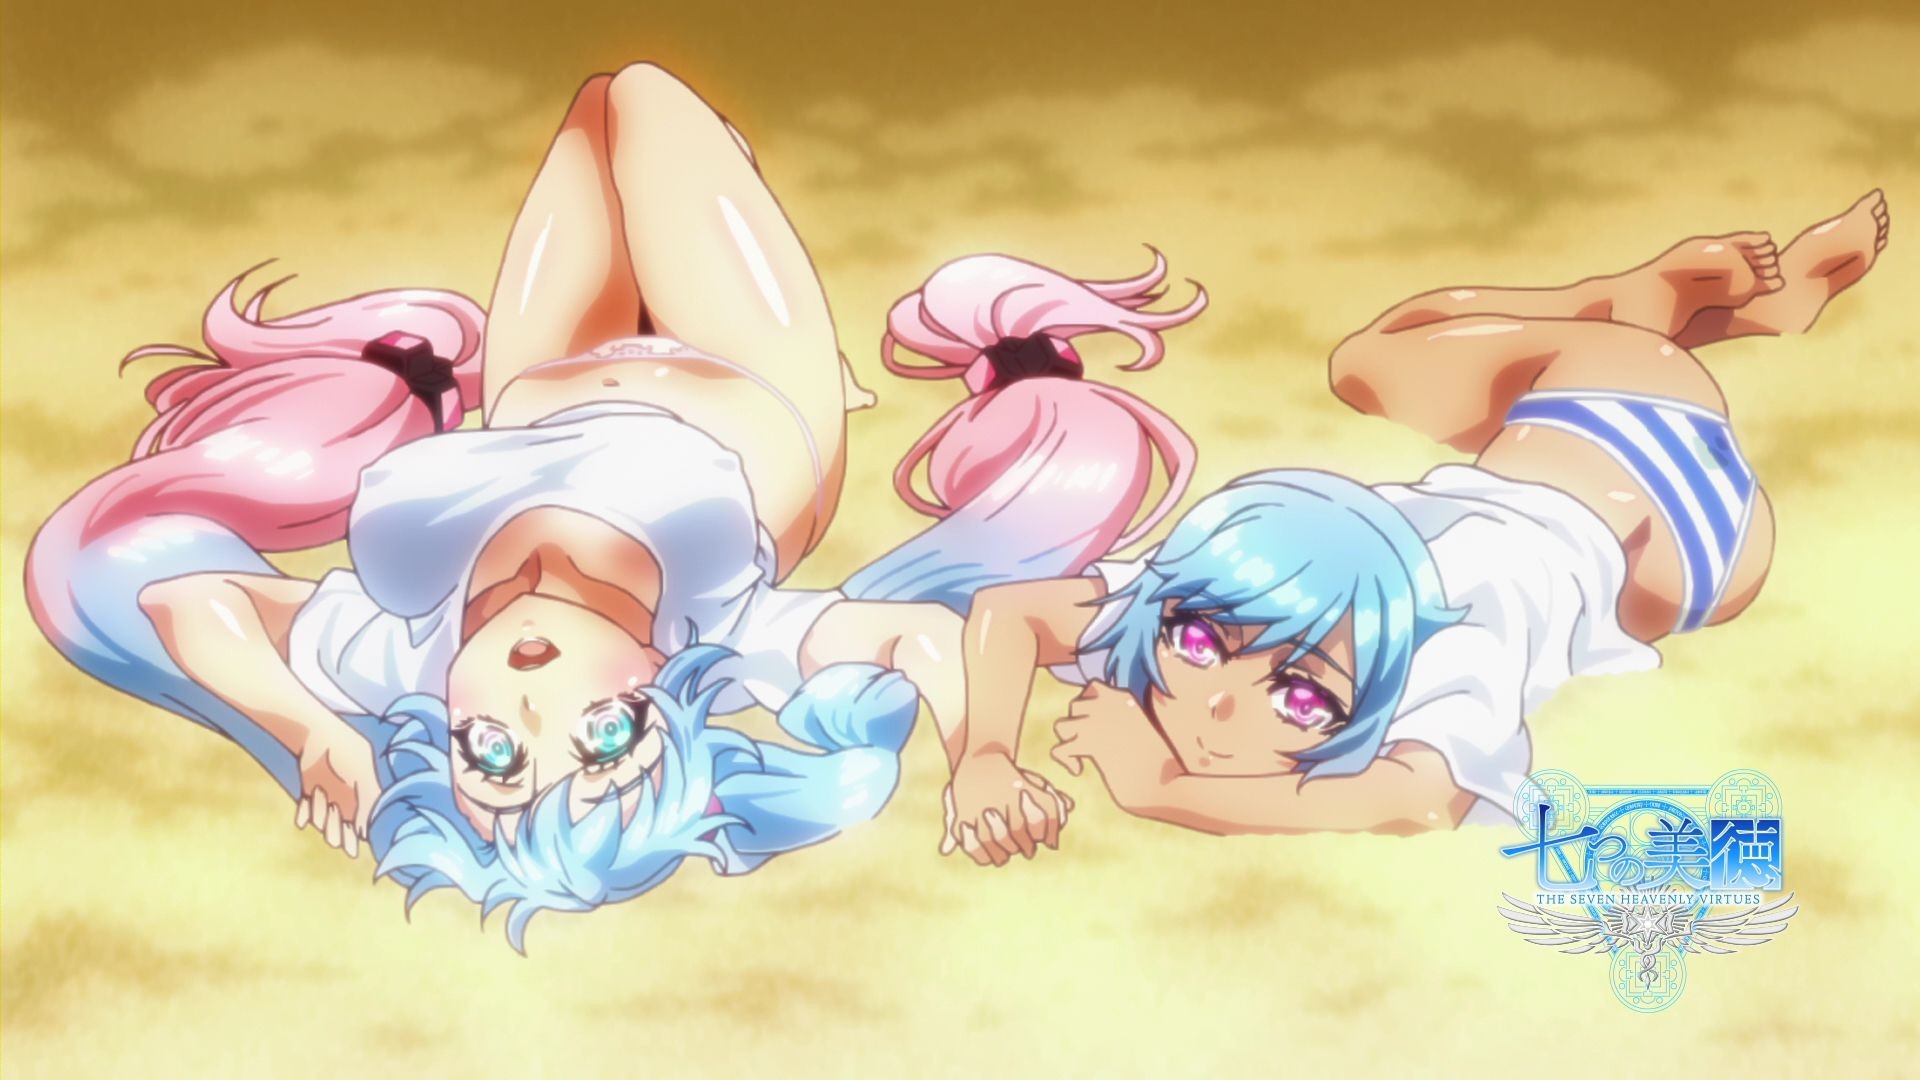 Seven Virtues Blu-ray bonus anime is naughty special training in swimsuit m...